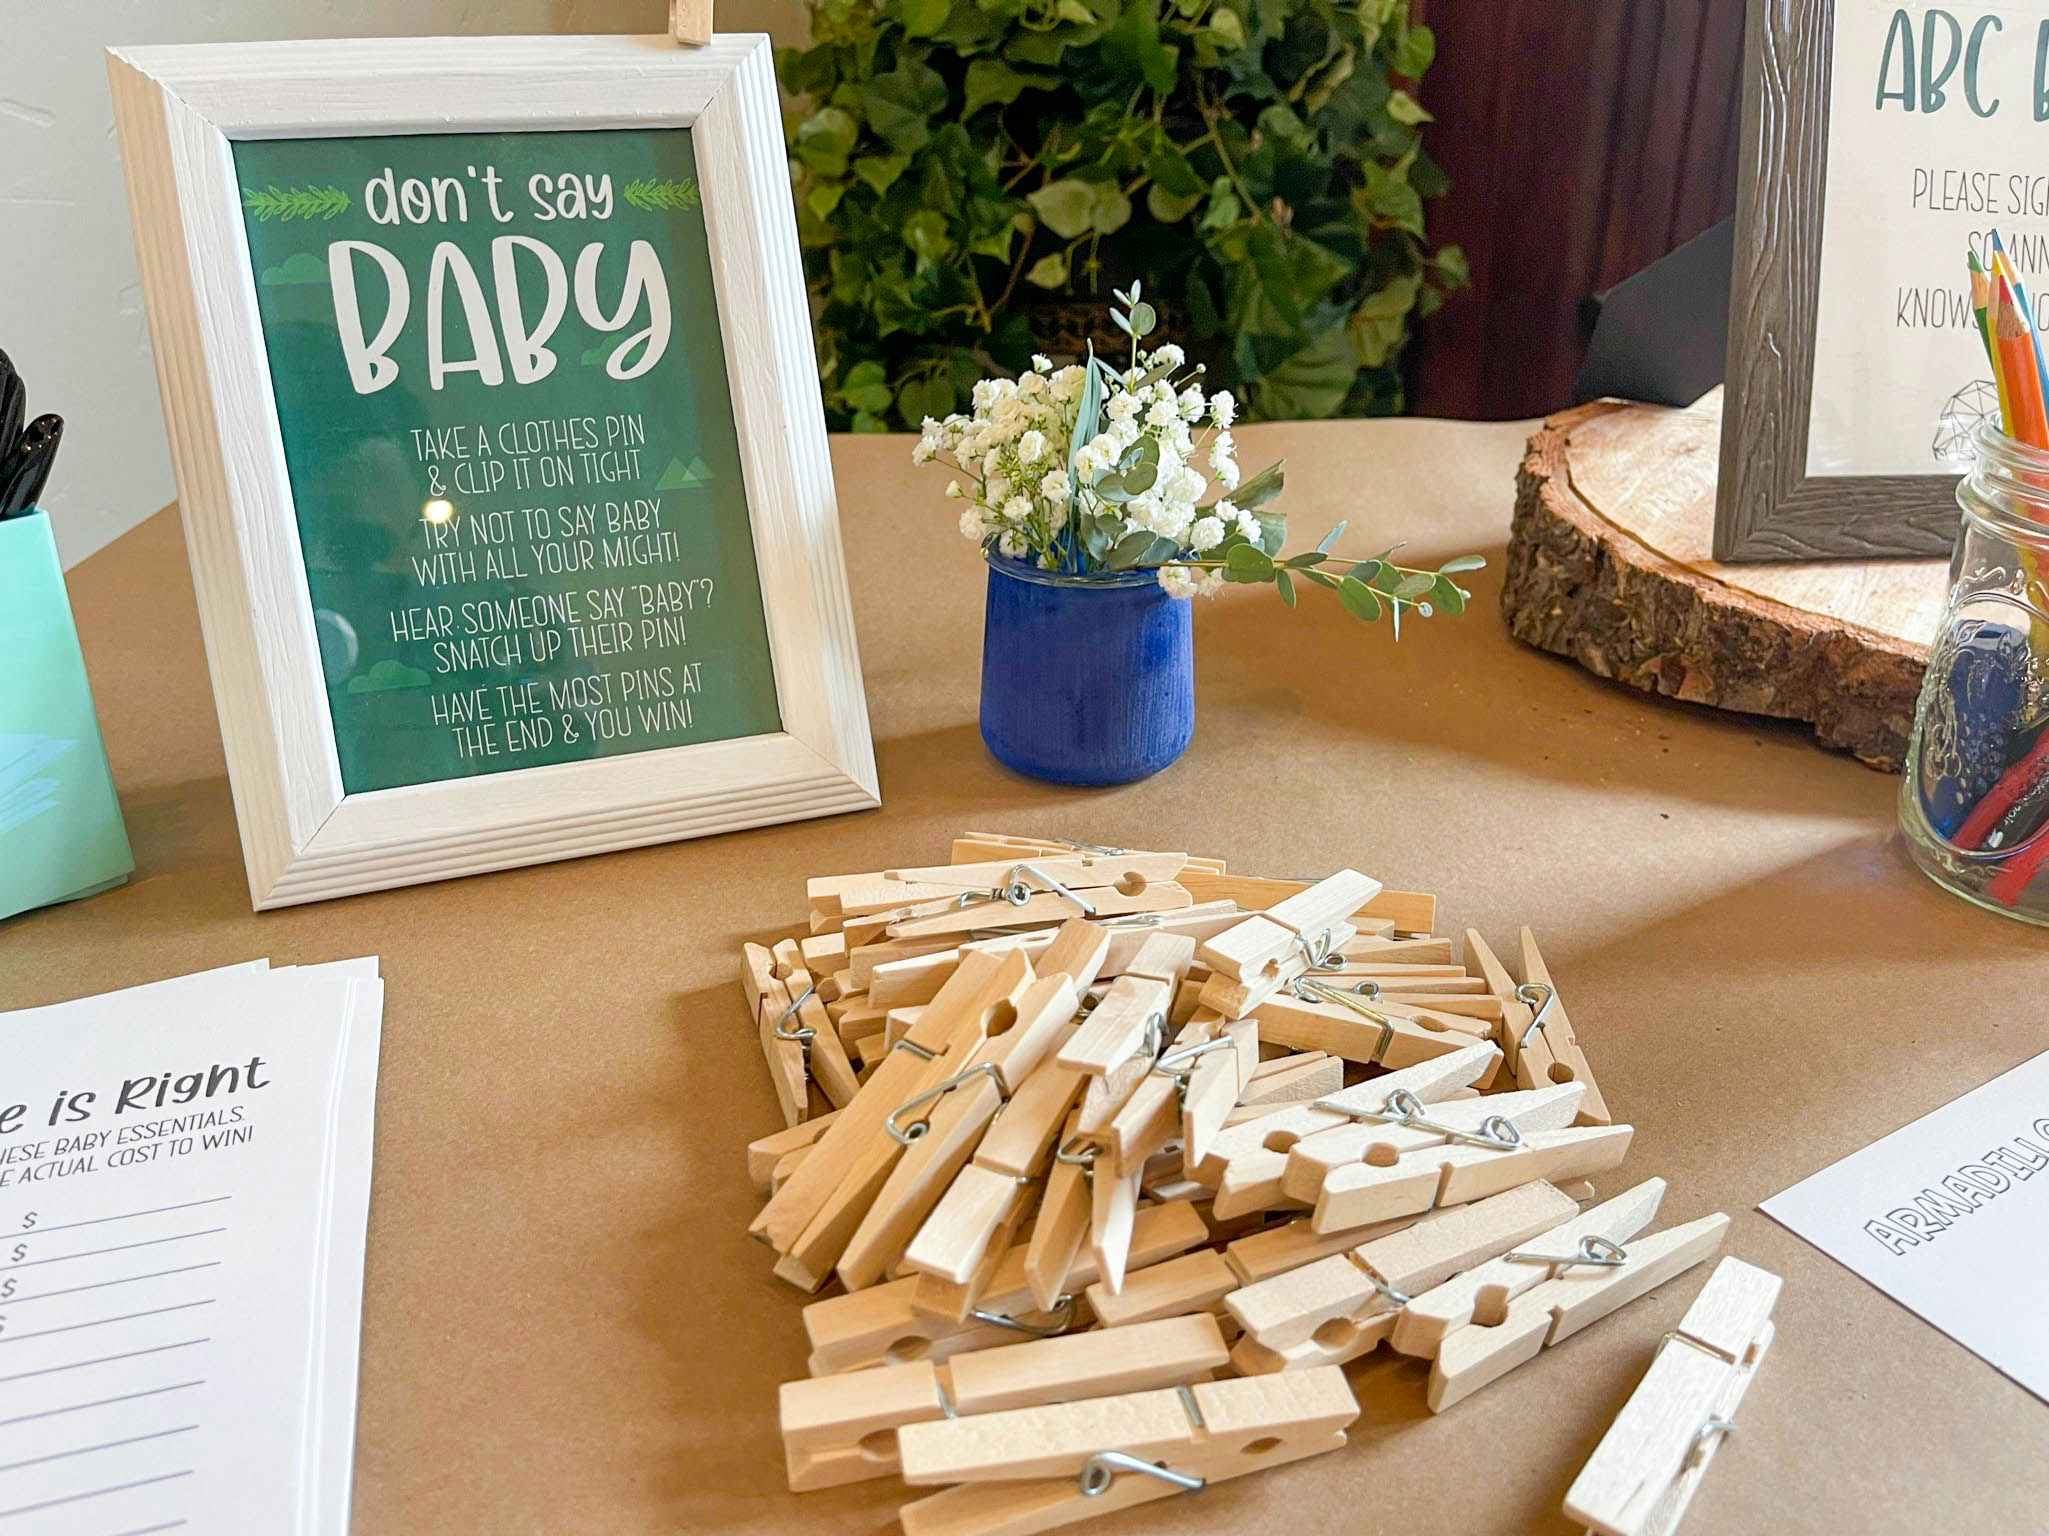 Clothes pins on a table next to a sign that say "Don't say baby" with game instructions.